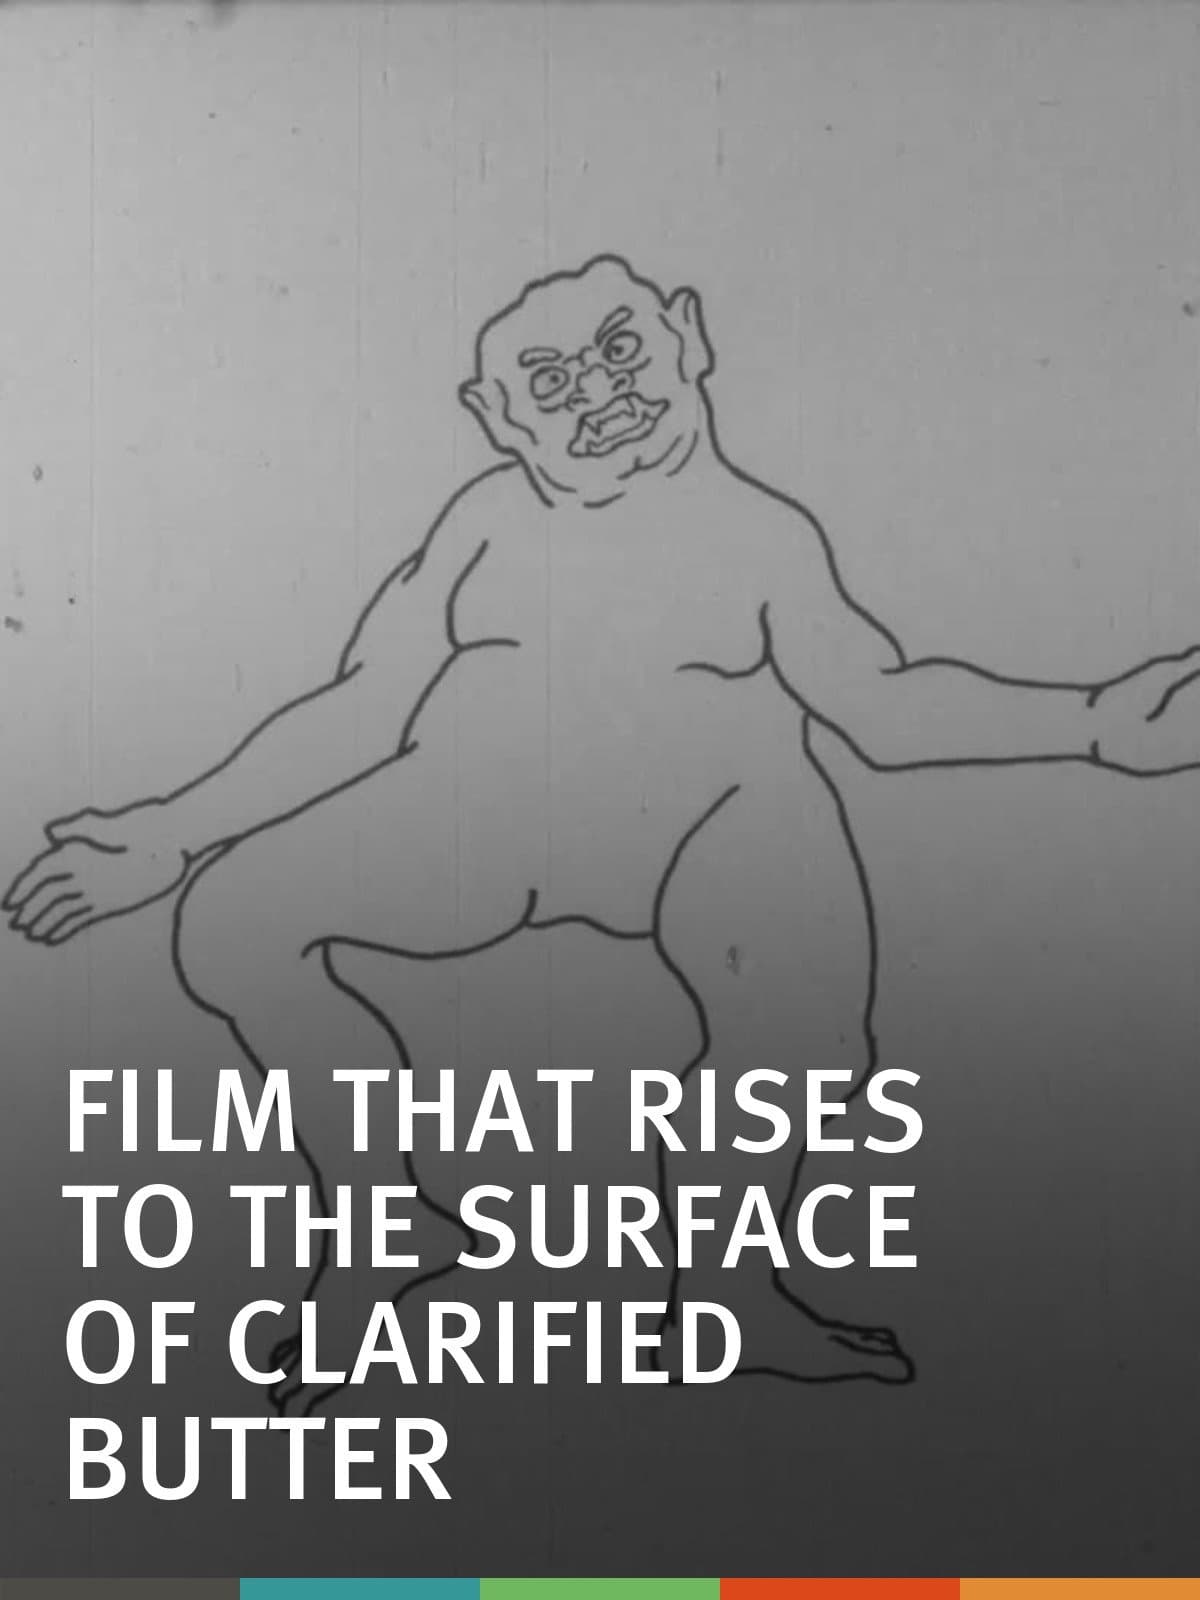 The Film That Rises to the Surface of Clarified Butter